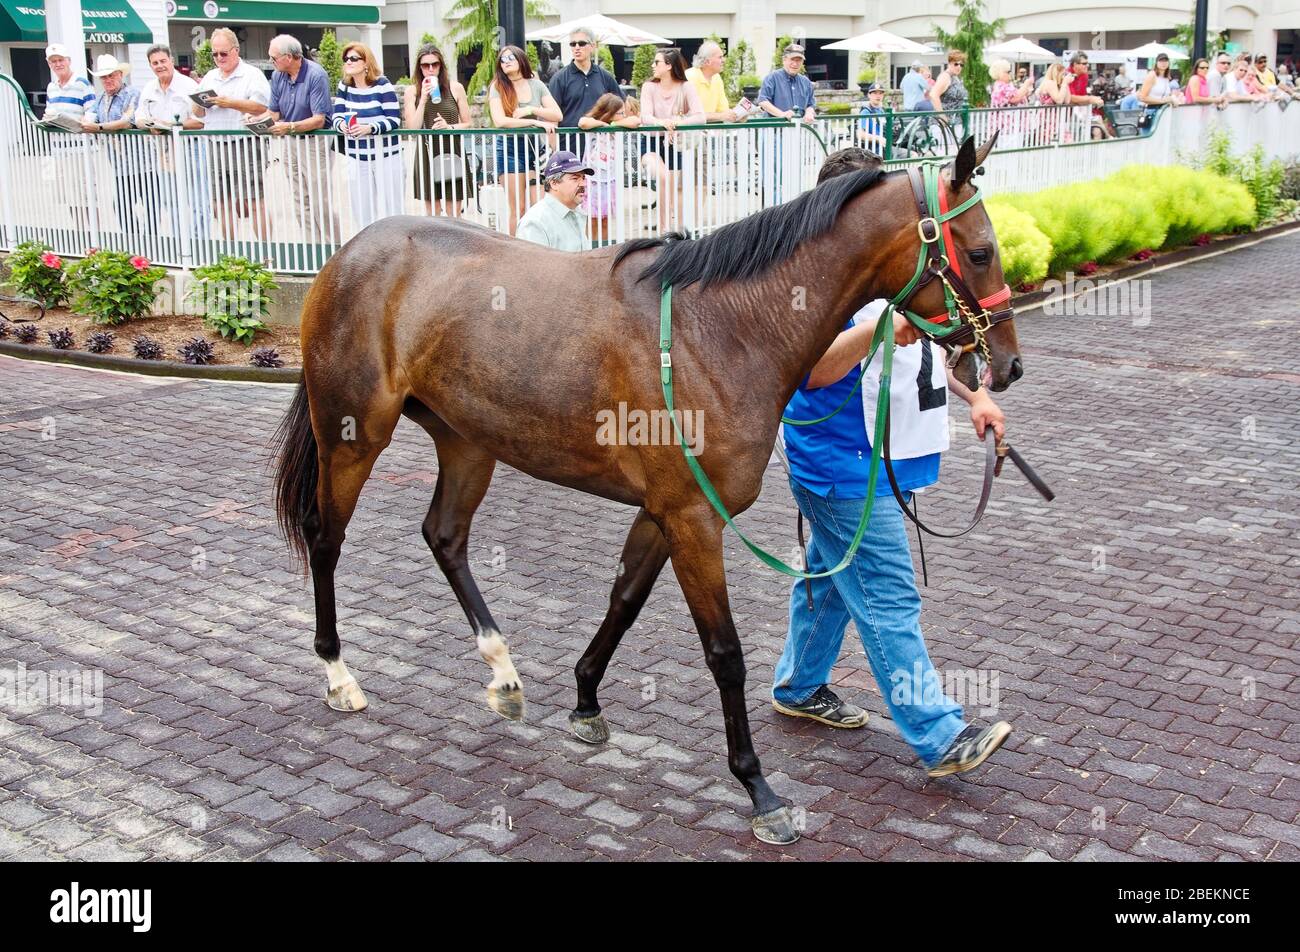 attendant leading race horse into paddock, walking, equine, white socks back legs, people watching, job, foot moving, Churchill Downs Racetrack; USA; Stock Photo